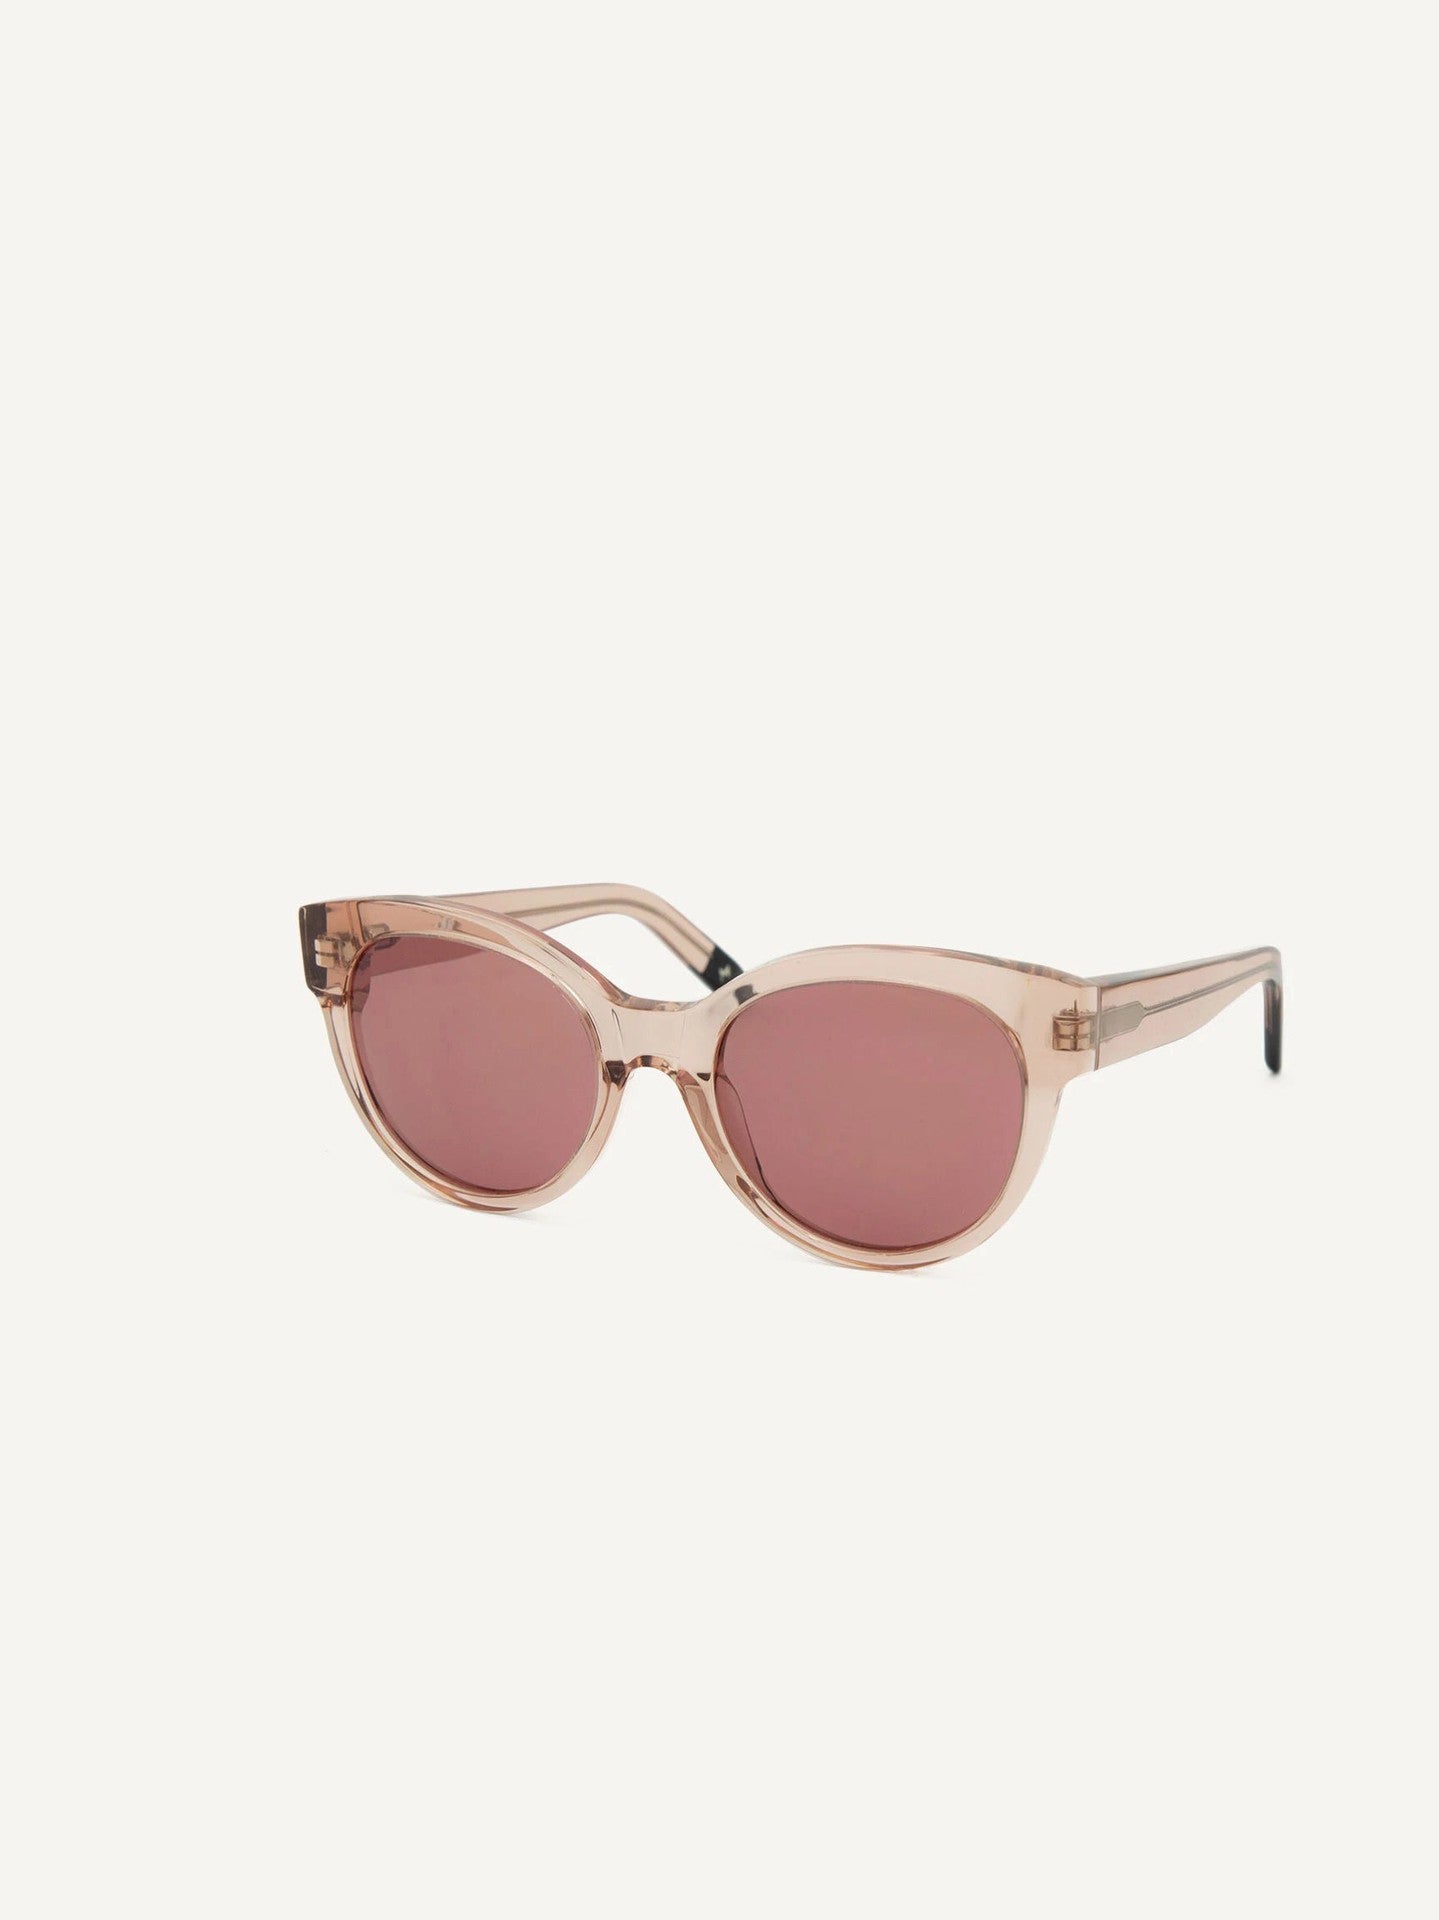 A pair of Paris Sunglasses – Pale Rose by Dick Moby on a white background.